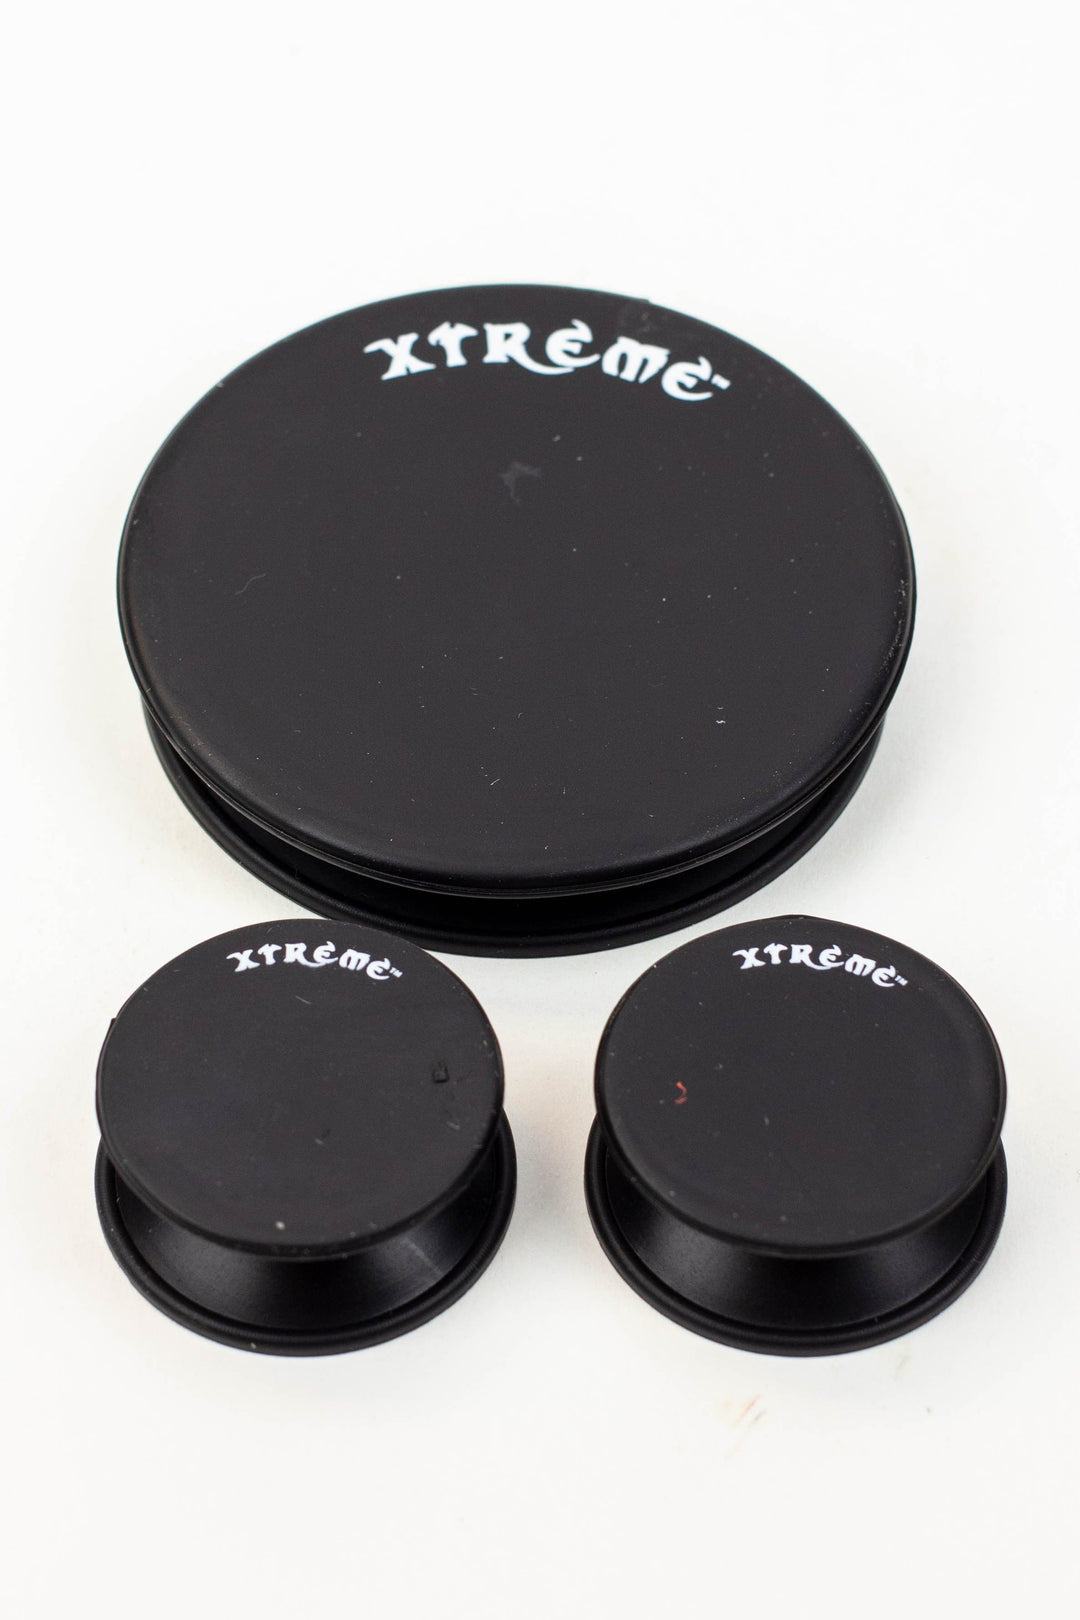 Xtreme caps universal caps for cleaning, storage, and odour proofing glass water pipes rigs and more_0